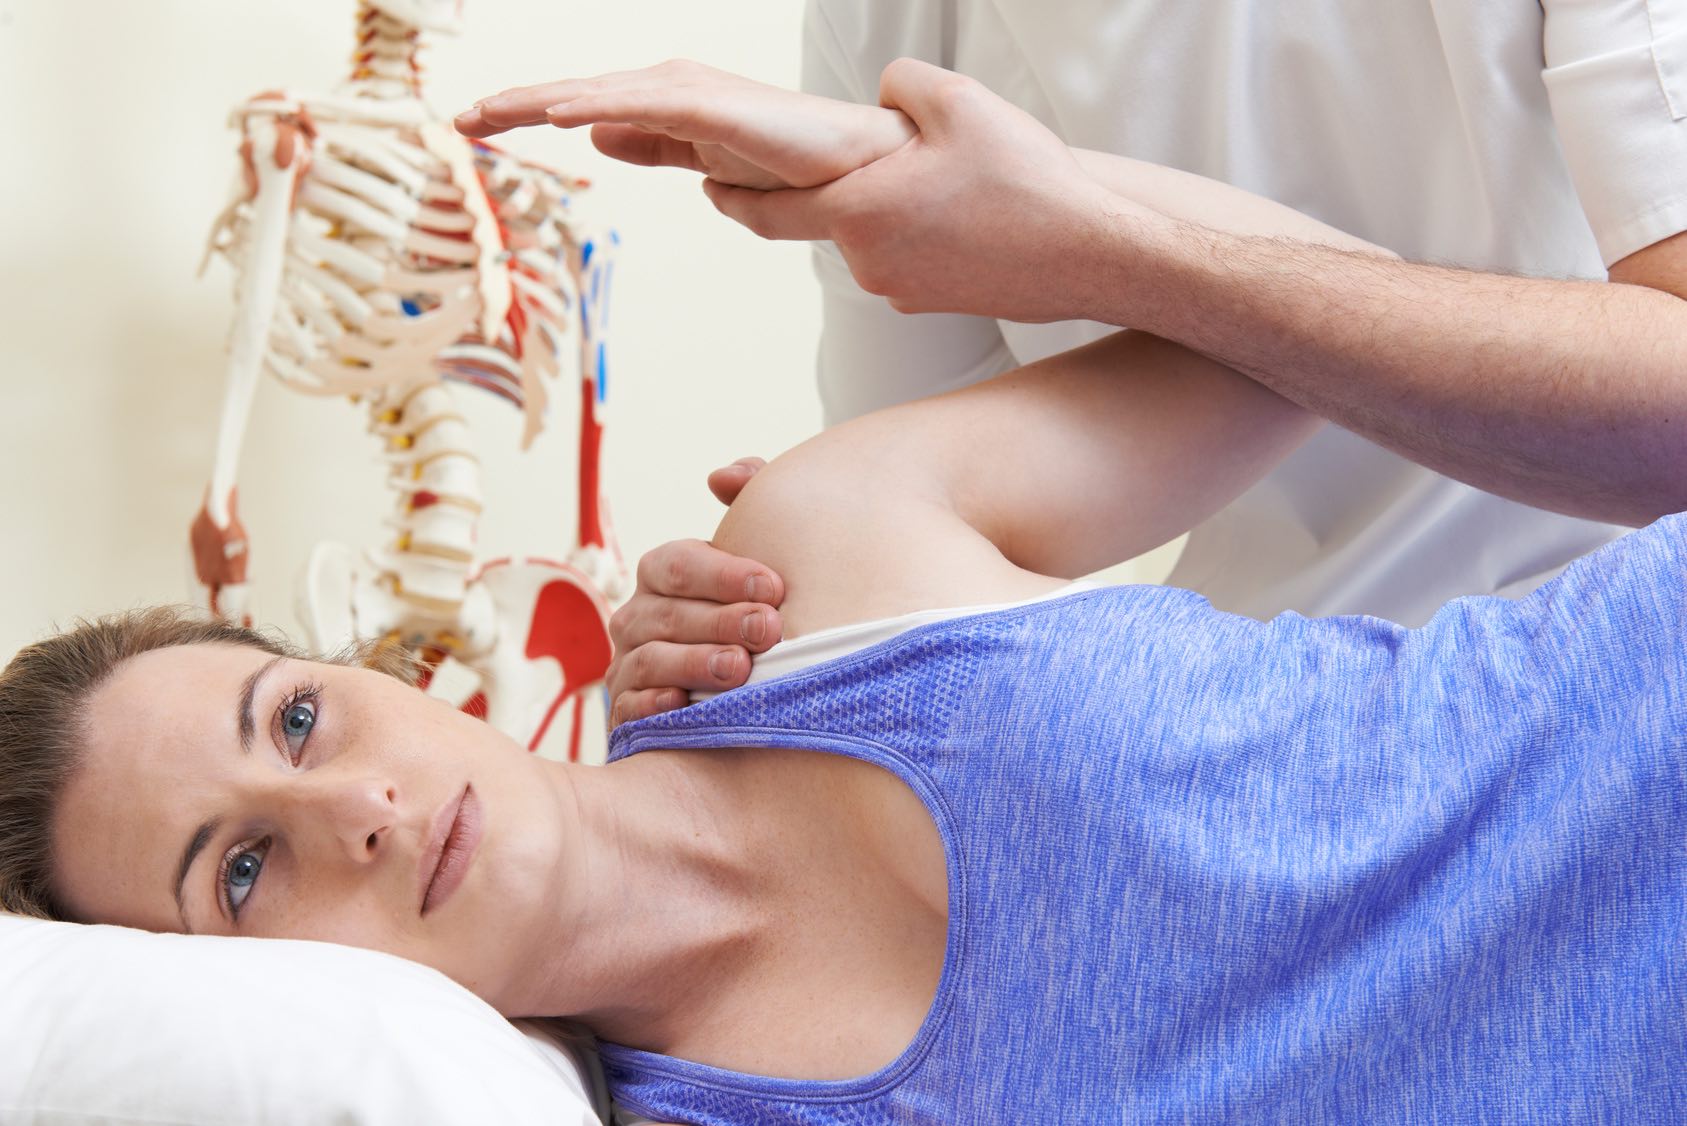 if you are suffering from shoulder pain, please visit the massage therapist